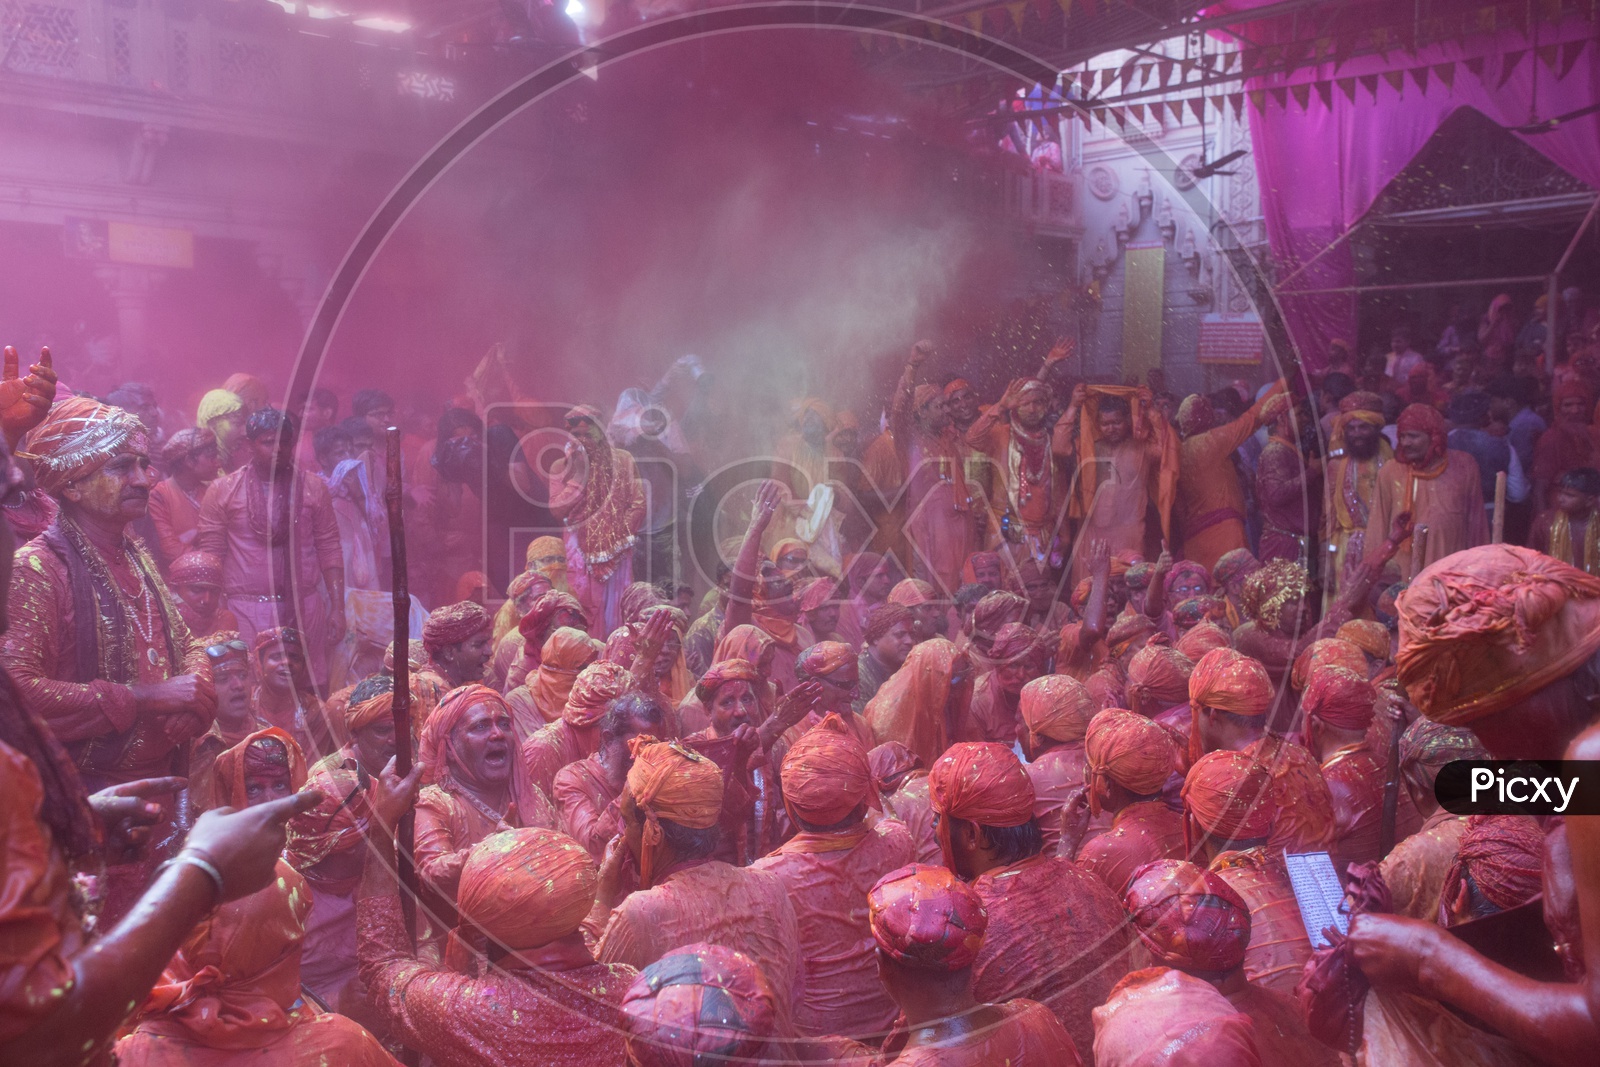 Local People In Barsana Celebrating Lathmar Holi as a Crowd Singing Songs  With Color And Water Spalsh